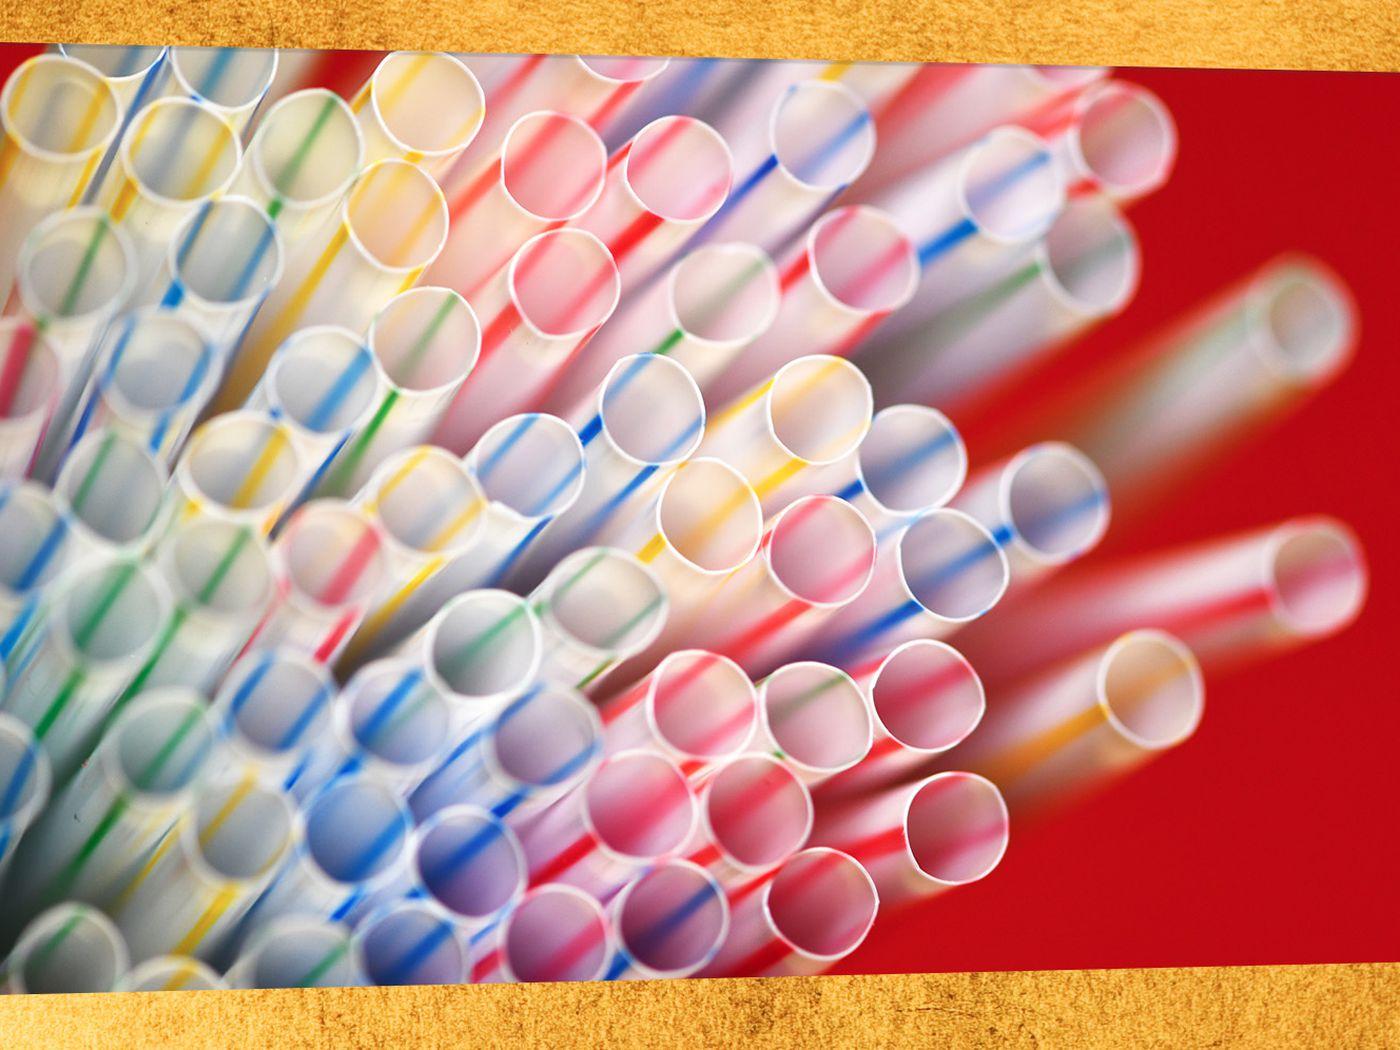 How the Plastic Straw Ban Became the Biggest Trend of 2018